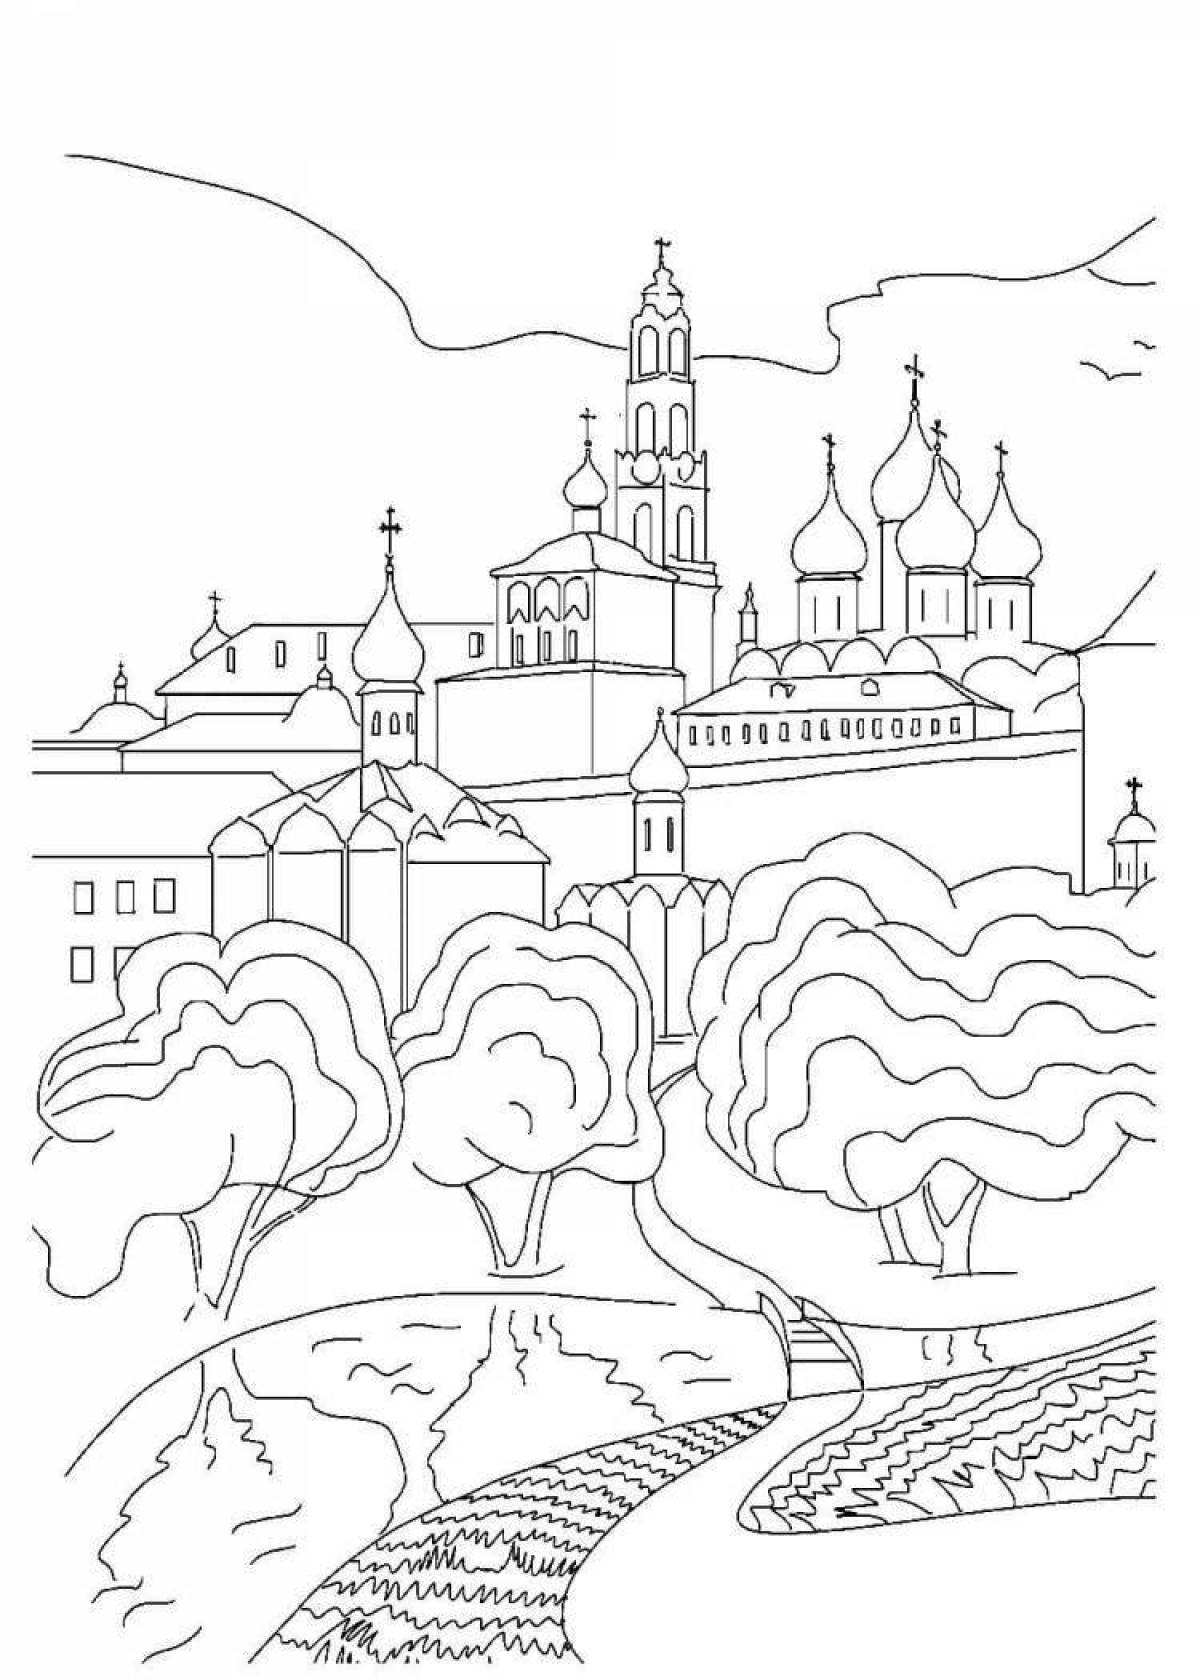 Coloring book magic moscow for grade 1